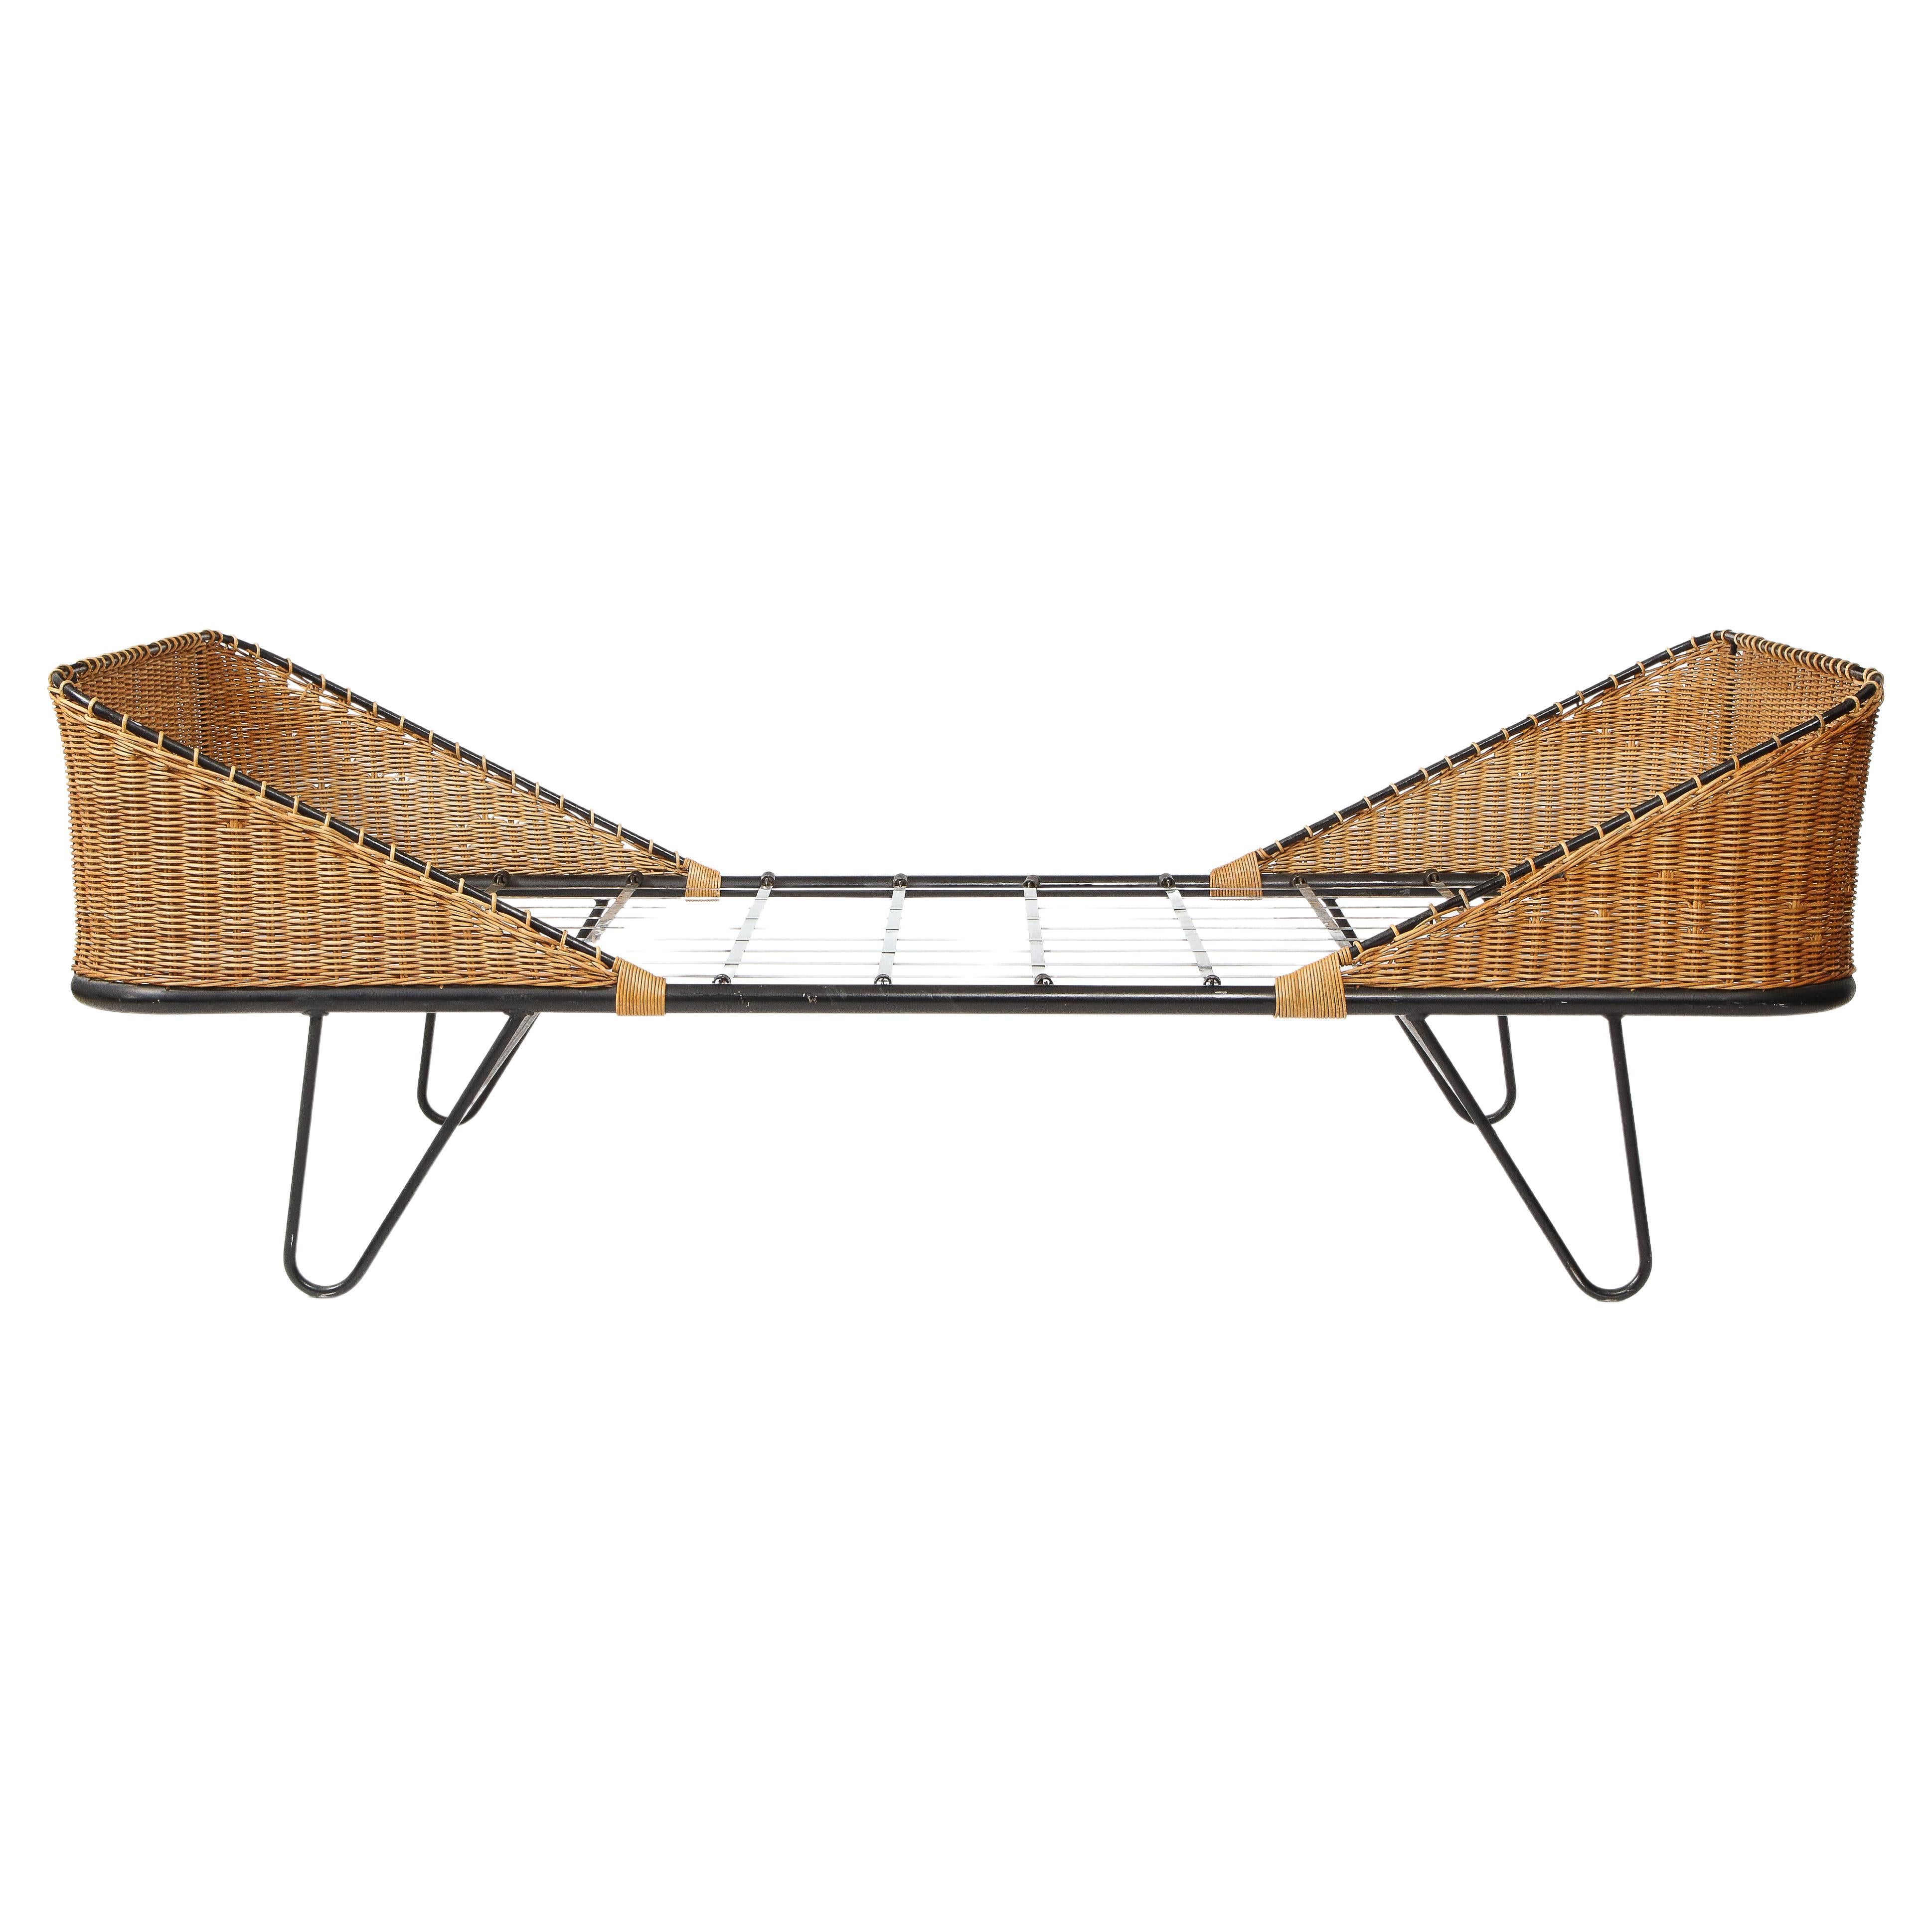 Raoul Guy Wrought Iron & Wicker Daybed, France 1960's For Sale